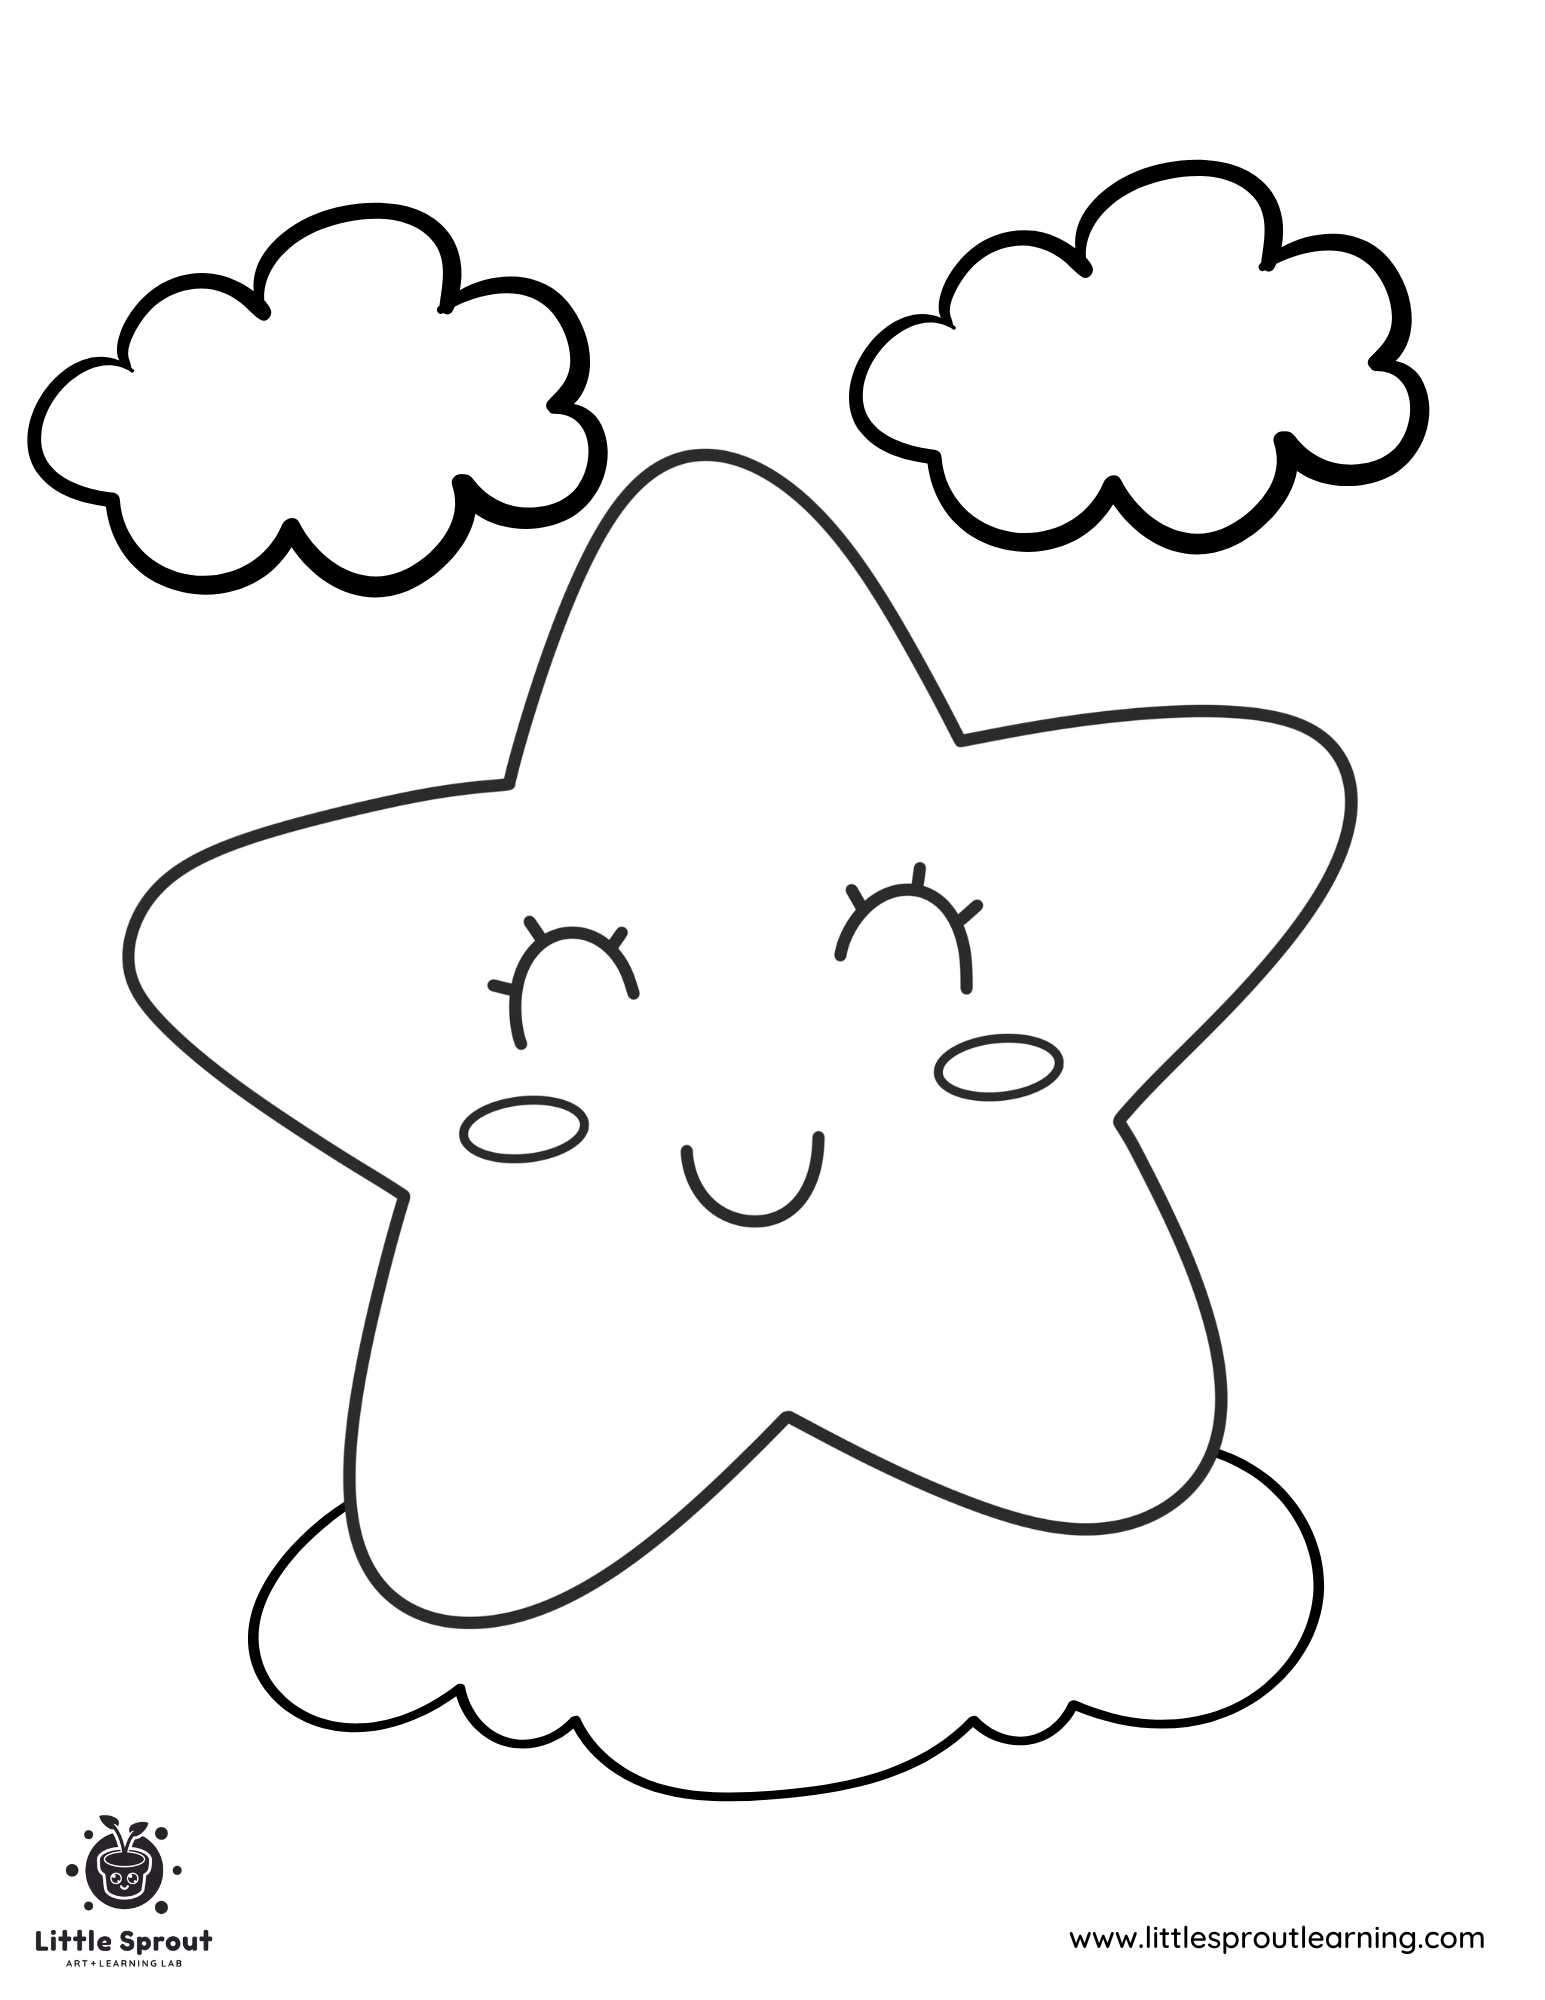 Smiling Star Coloring Page